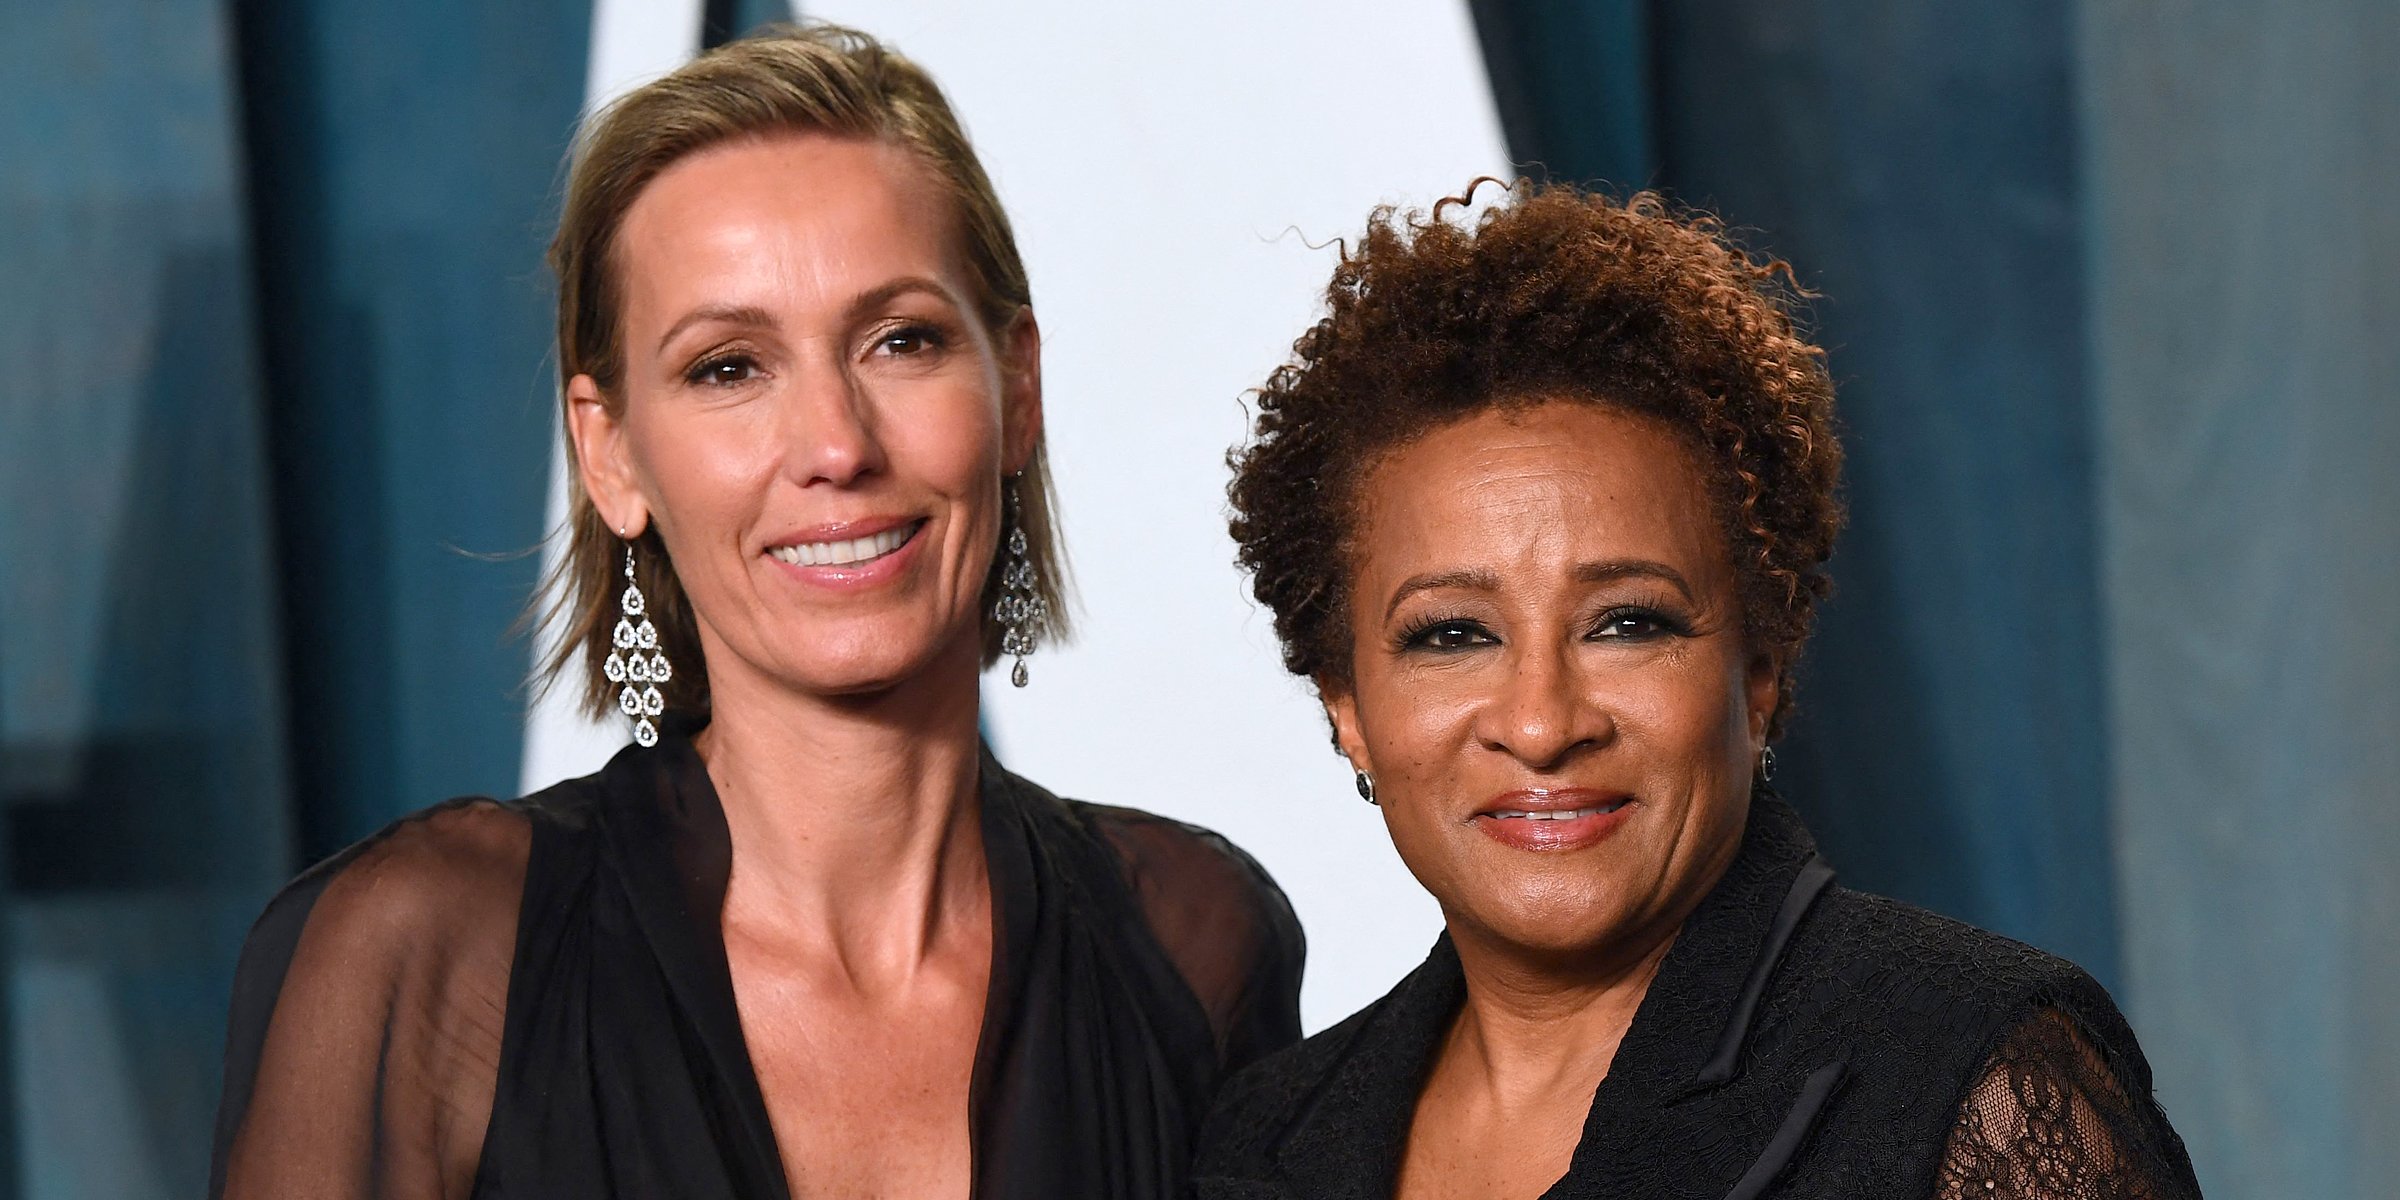 Alex Sykes and Wanda Sykes. | Source: Getty Images